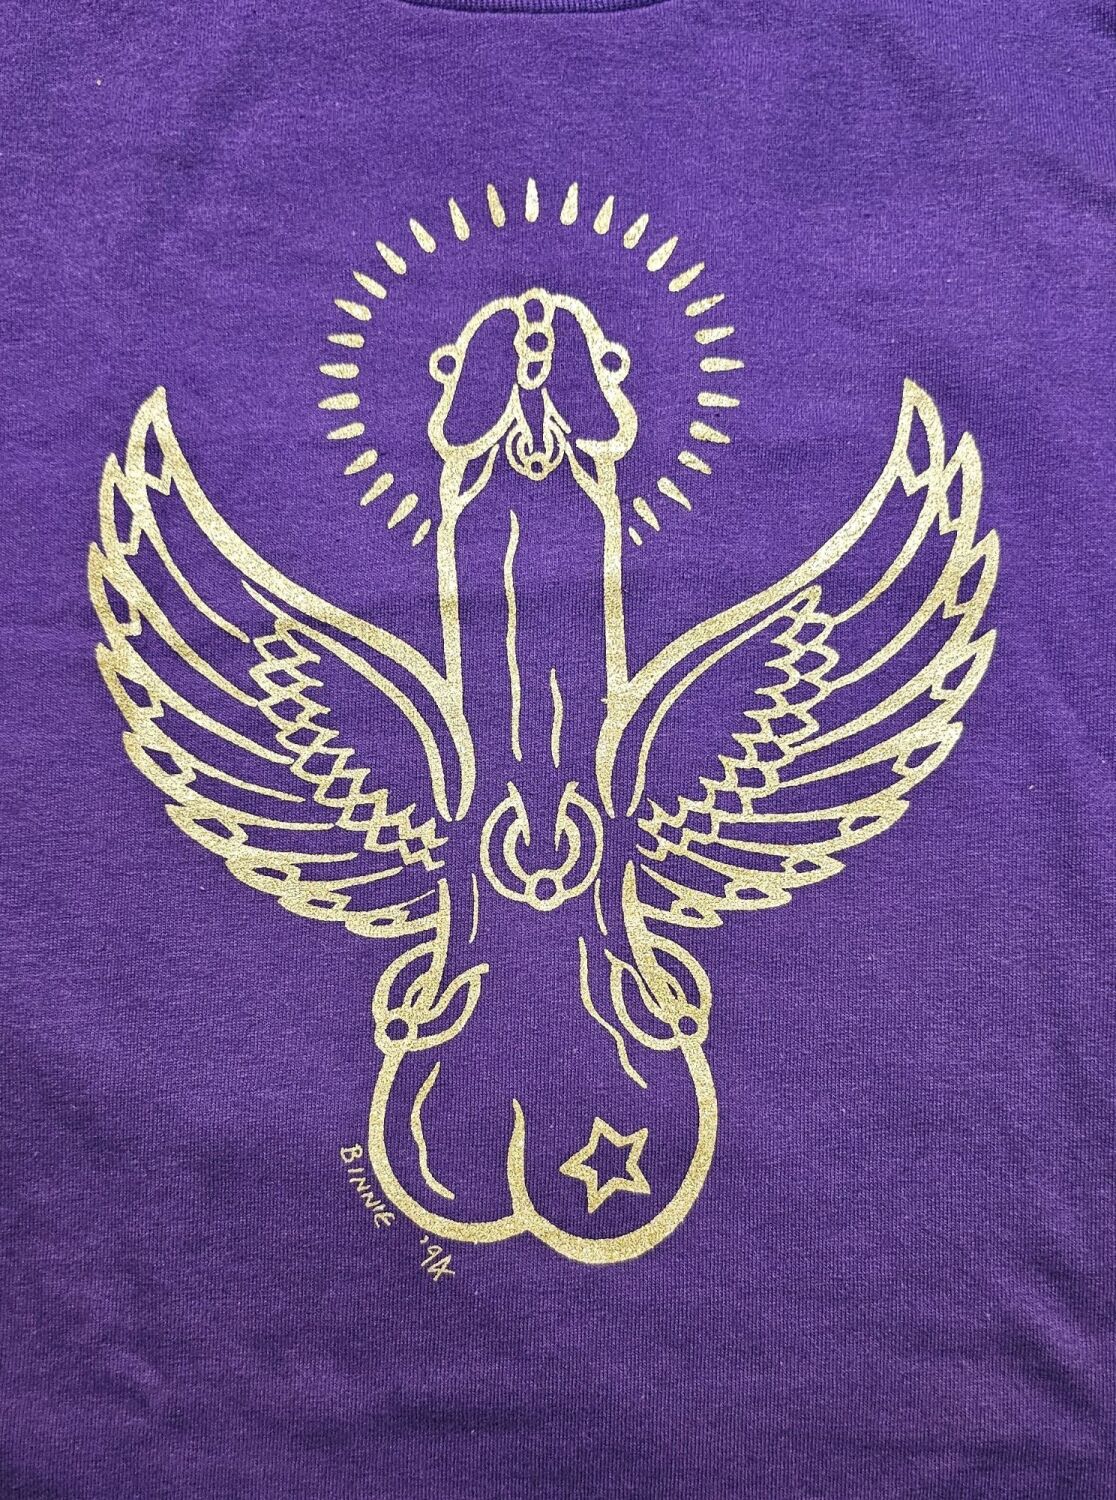 Iconic Flying cock Tee shirt  Gold on purple size XXL